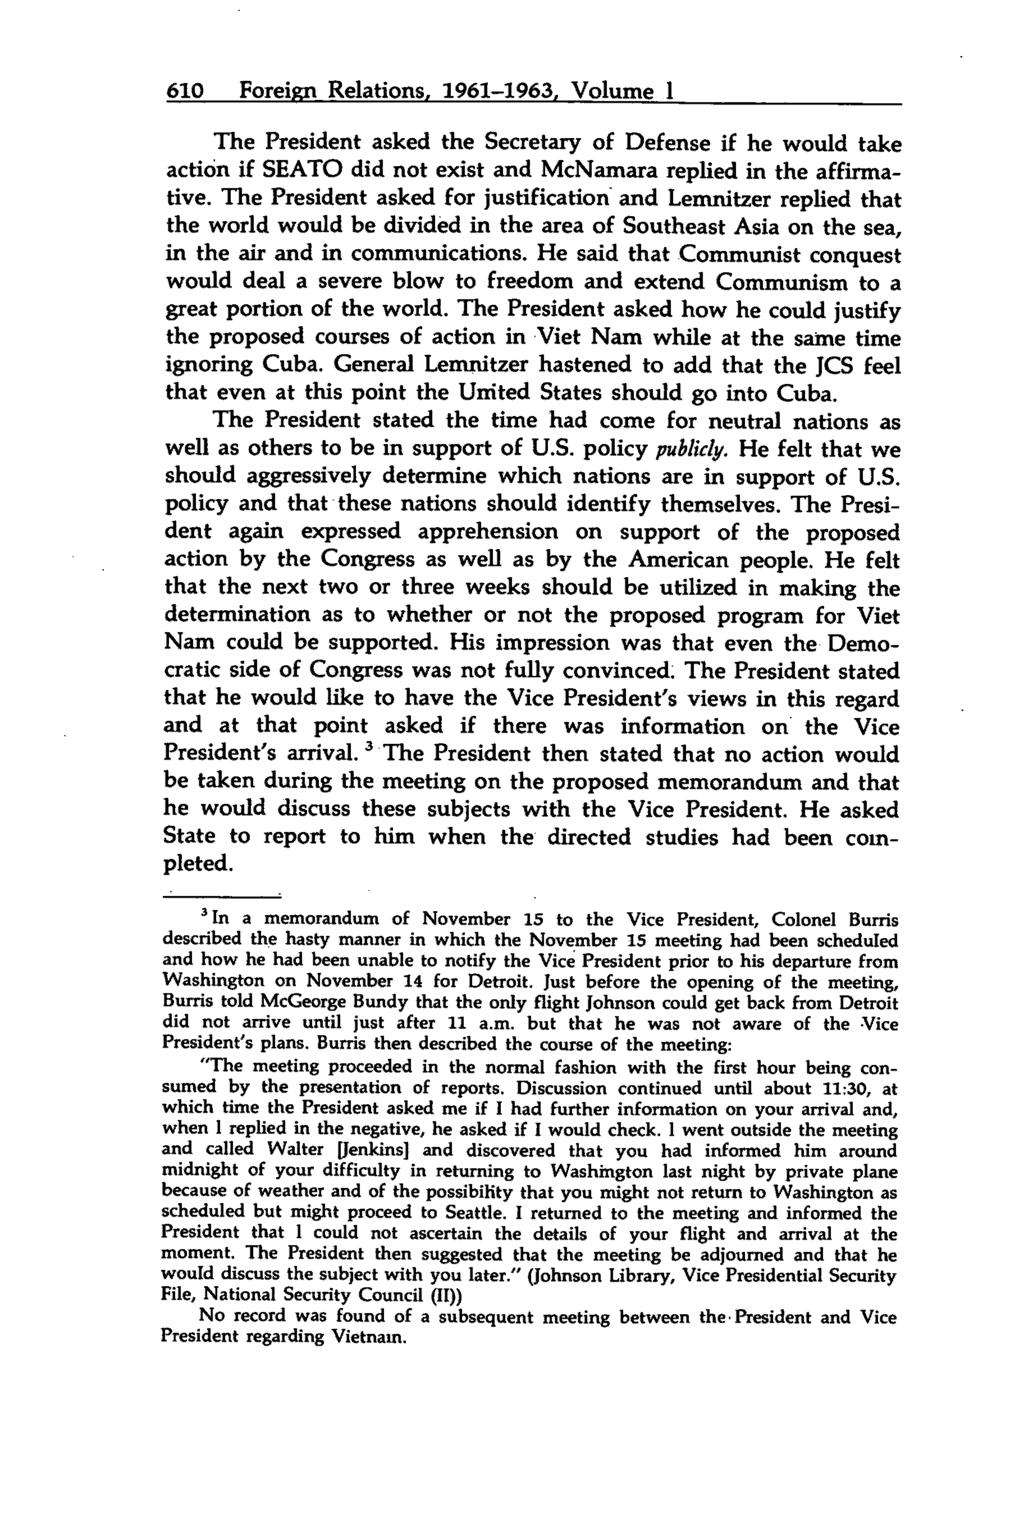 610 Foreign Relations, 1961-1963, Volume I The President asked the Secretary of Defense if he would take action if SEATO did not exist and McNamara replied in the affirmative.